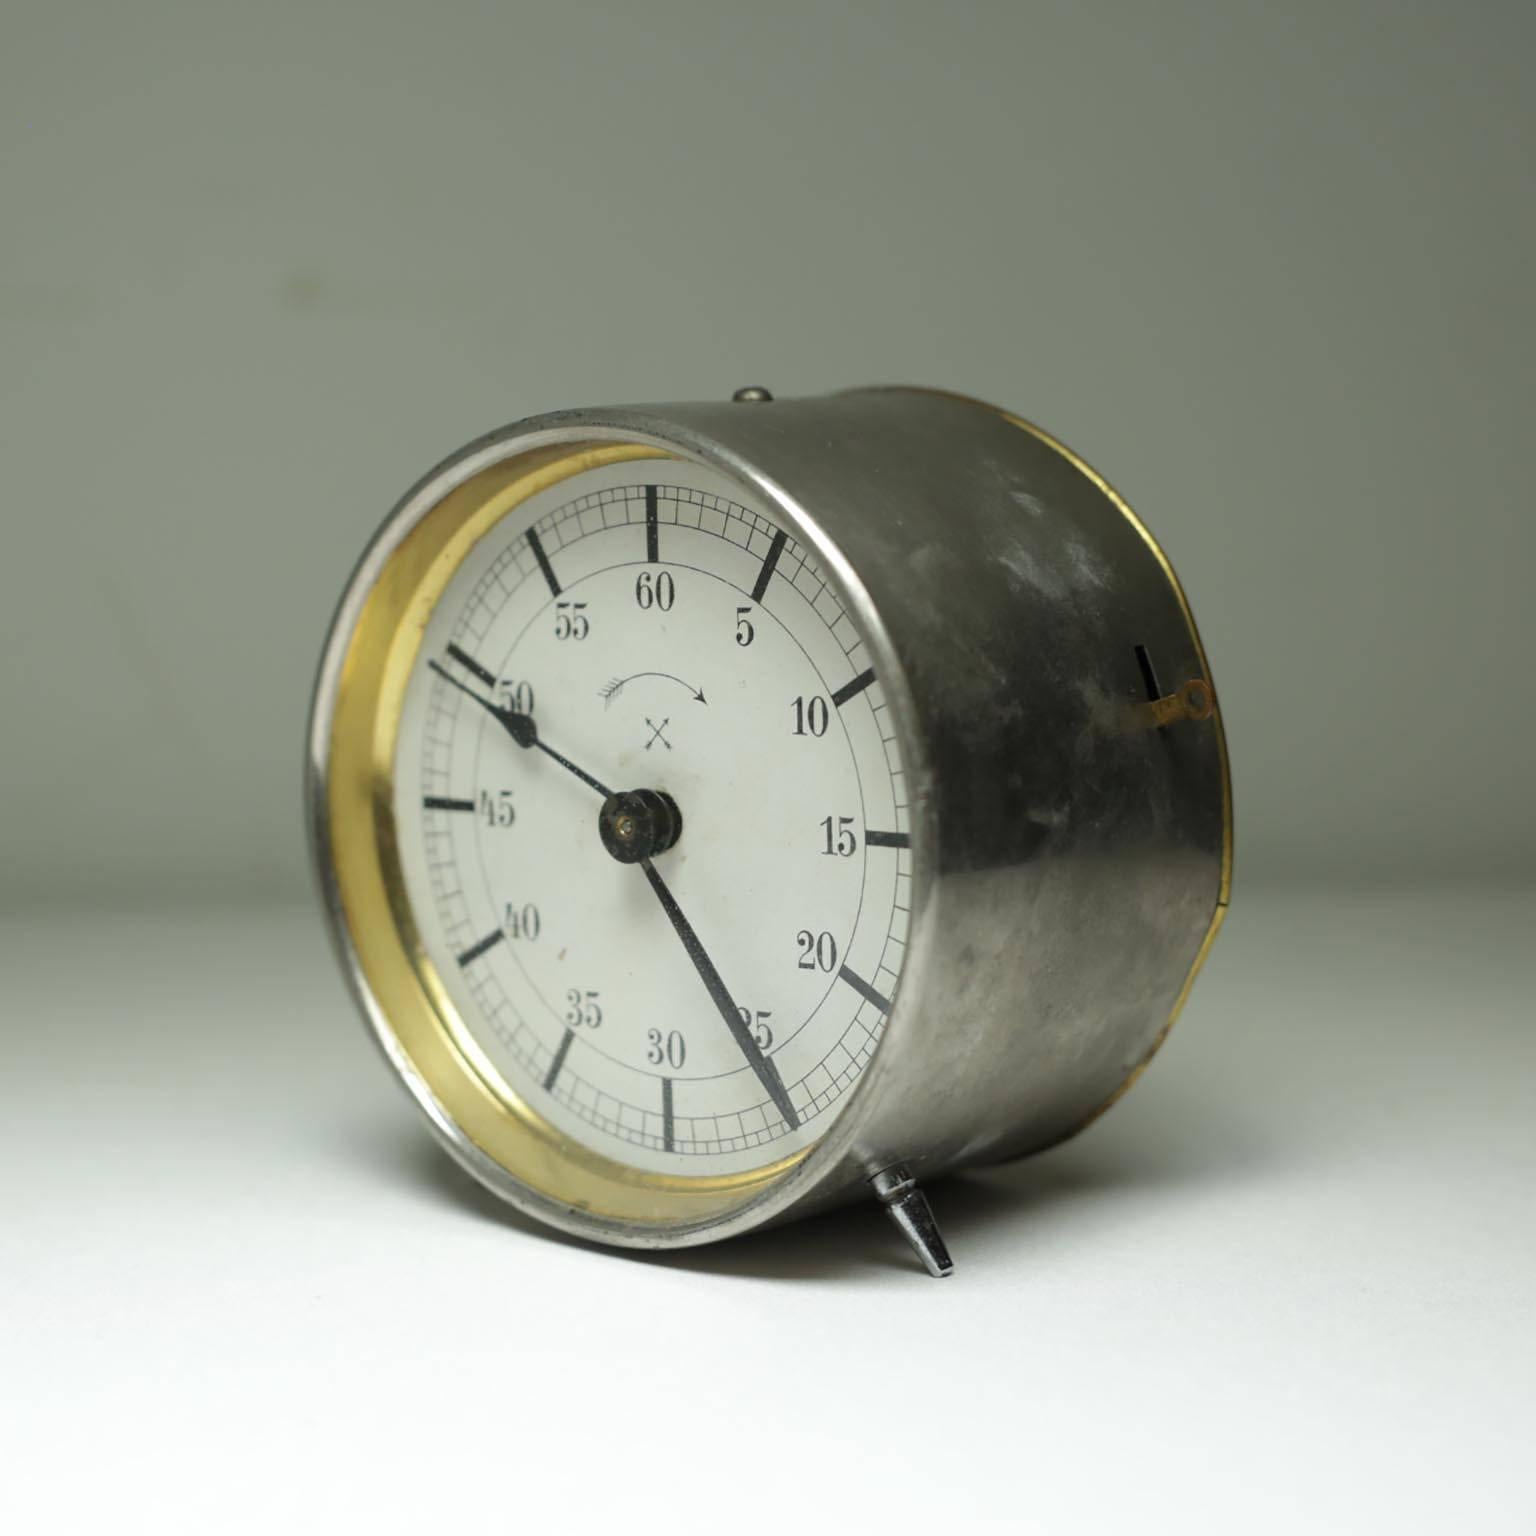 Photography timer circa 1950s. Works great. Perfect for the kitchen or bathroom.